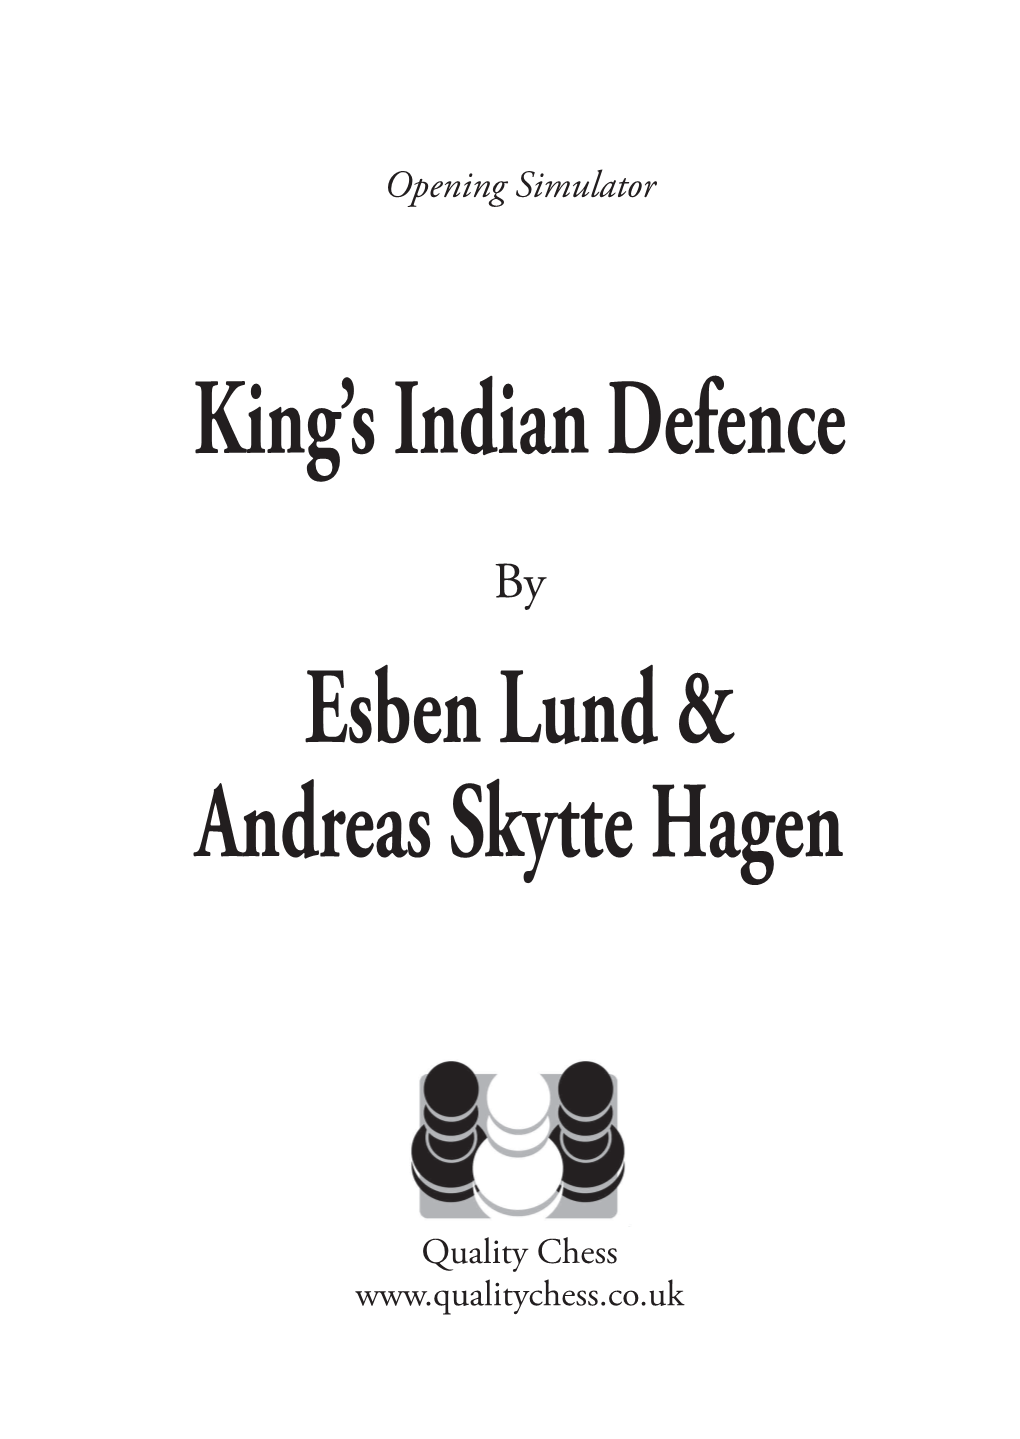 King's Indian Defence